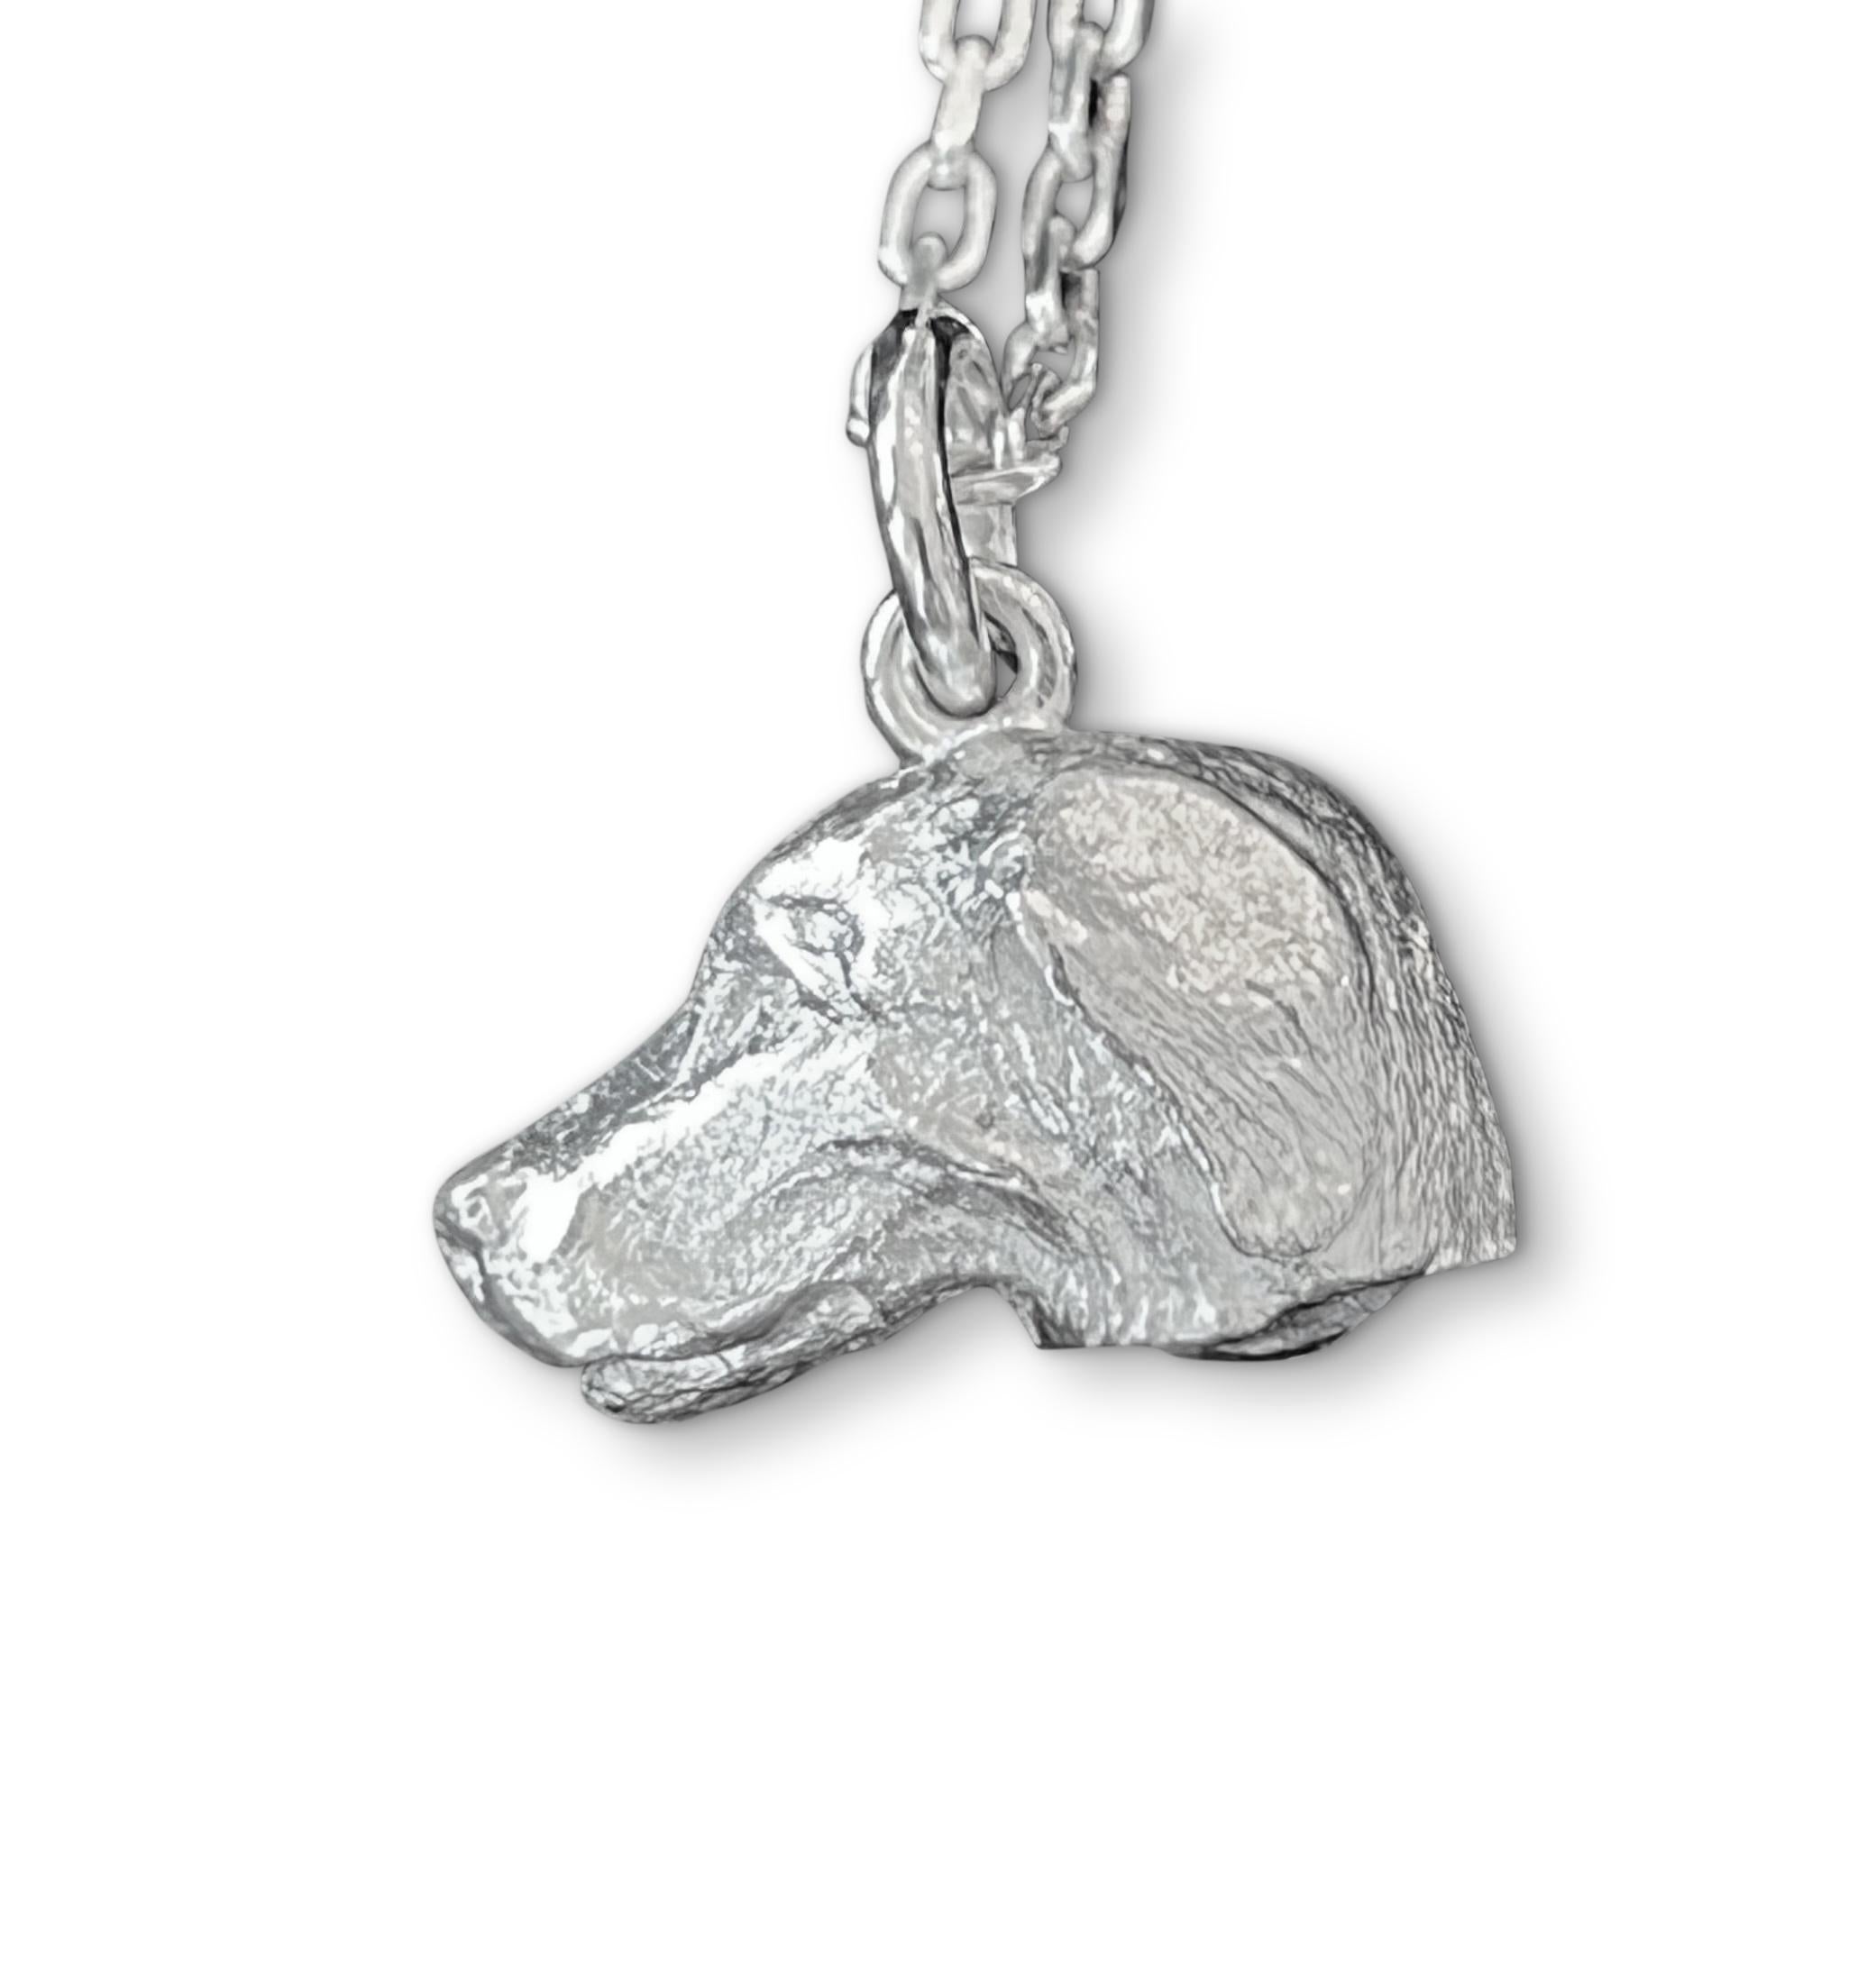 Discover the exquisite art of England’s renowned miniature wildlife sculptor, PAUL EATON, with his sculpted sterling silver Labrador dog charm or pendant.    Each bespoke animal pendant is meticulously carved, individually cast, and carefully